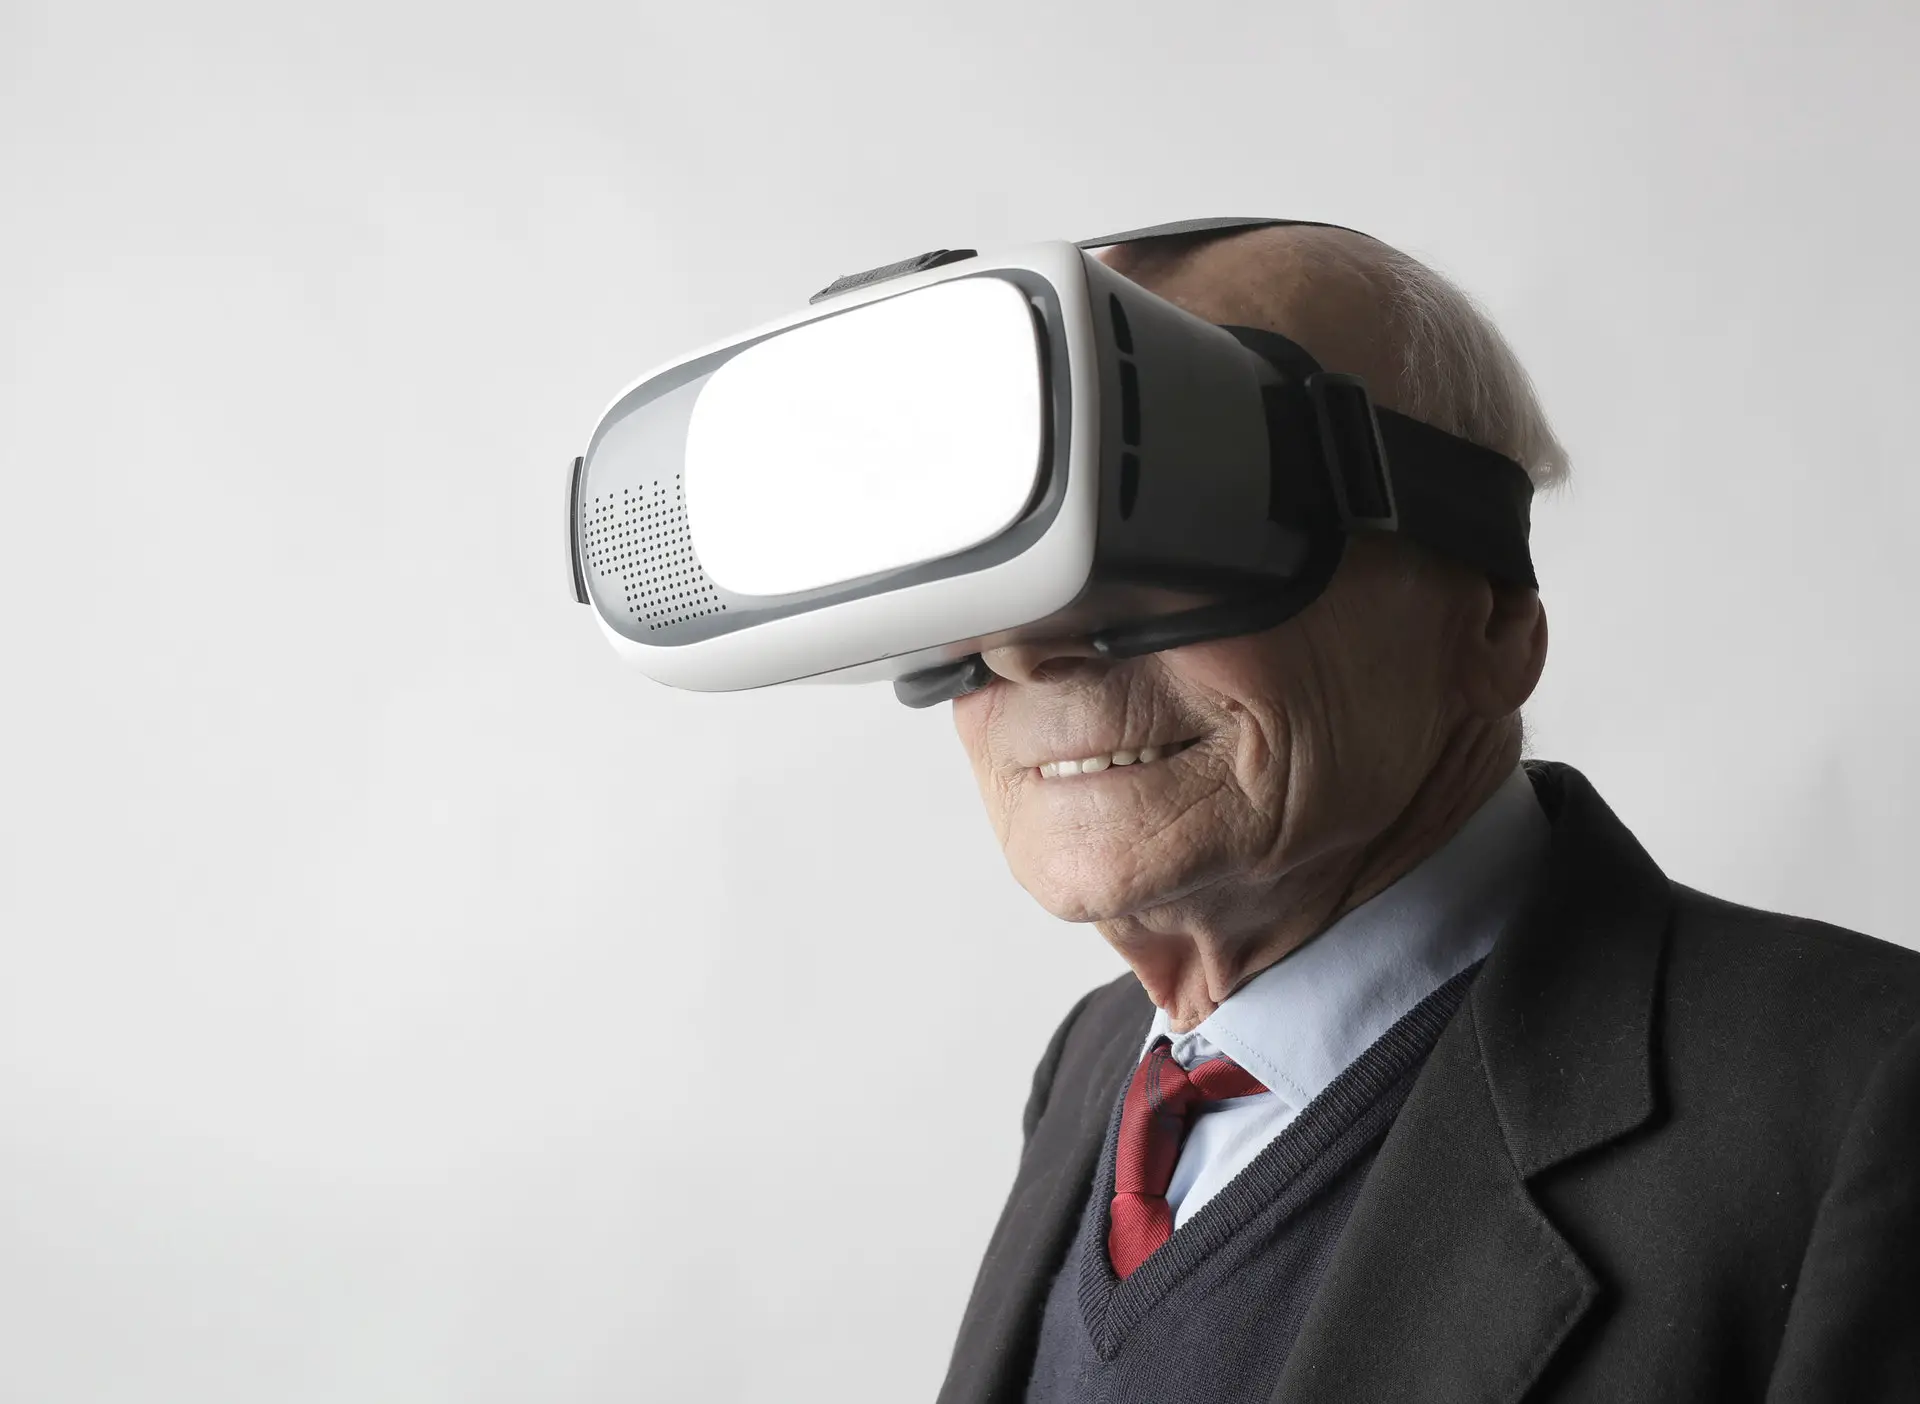 Select Rehabilitation Partners with MyndVR to Deploy VR Therapy for Post-Acute Care